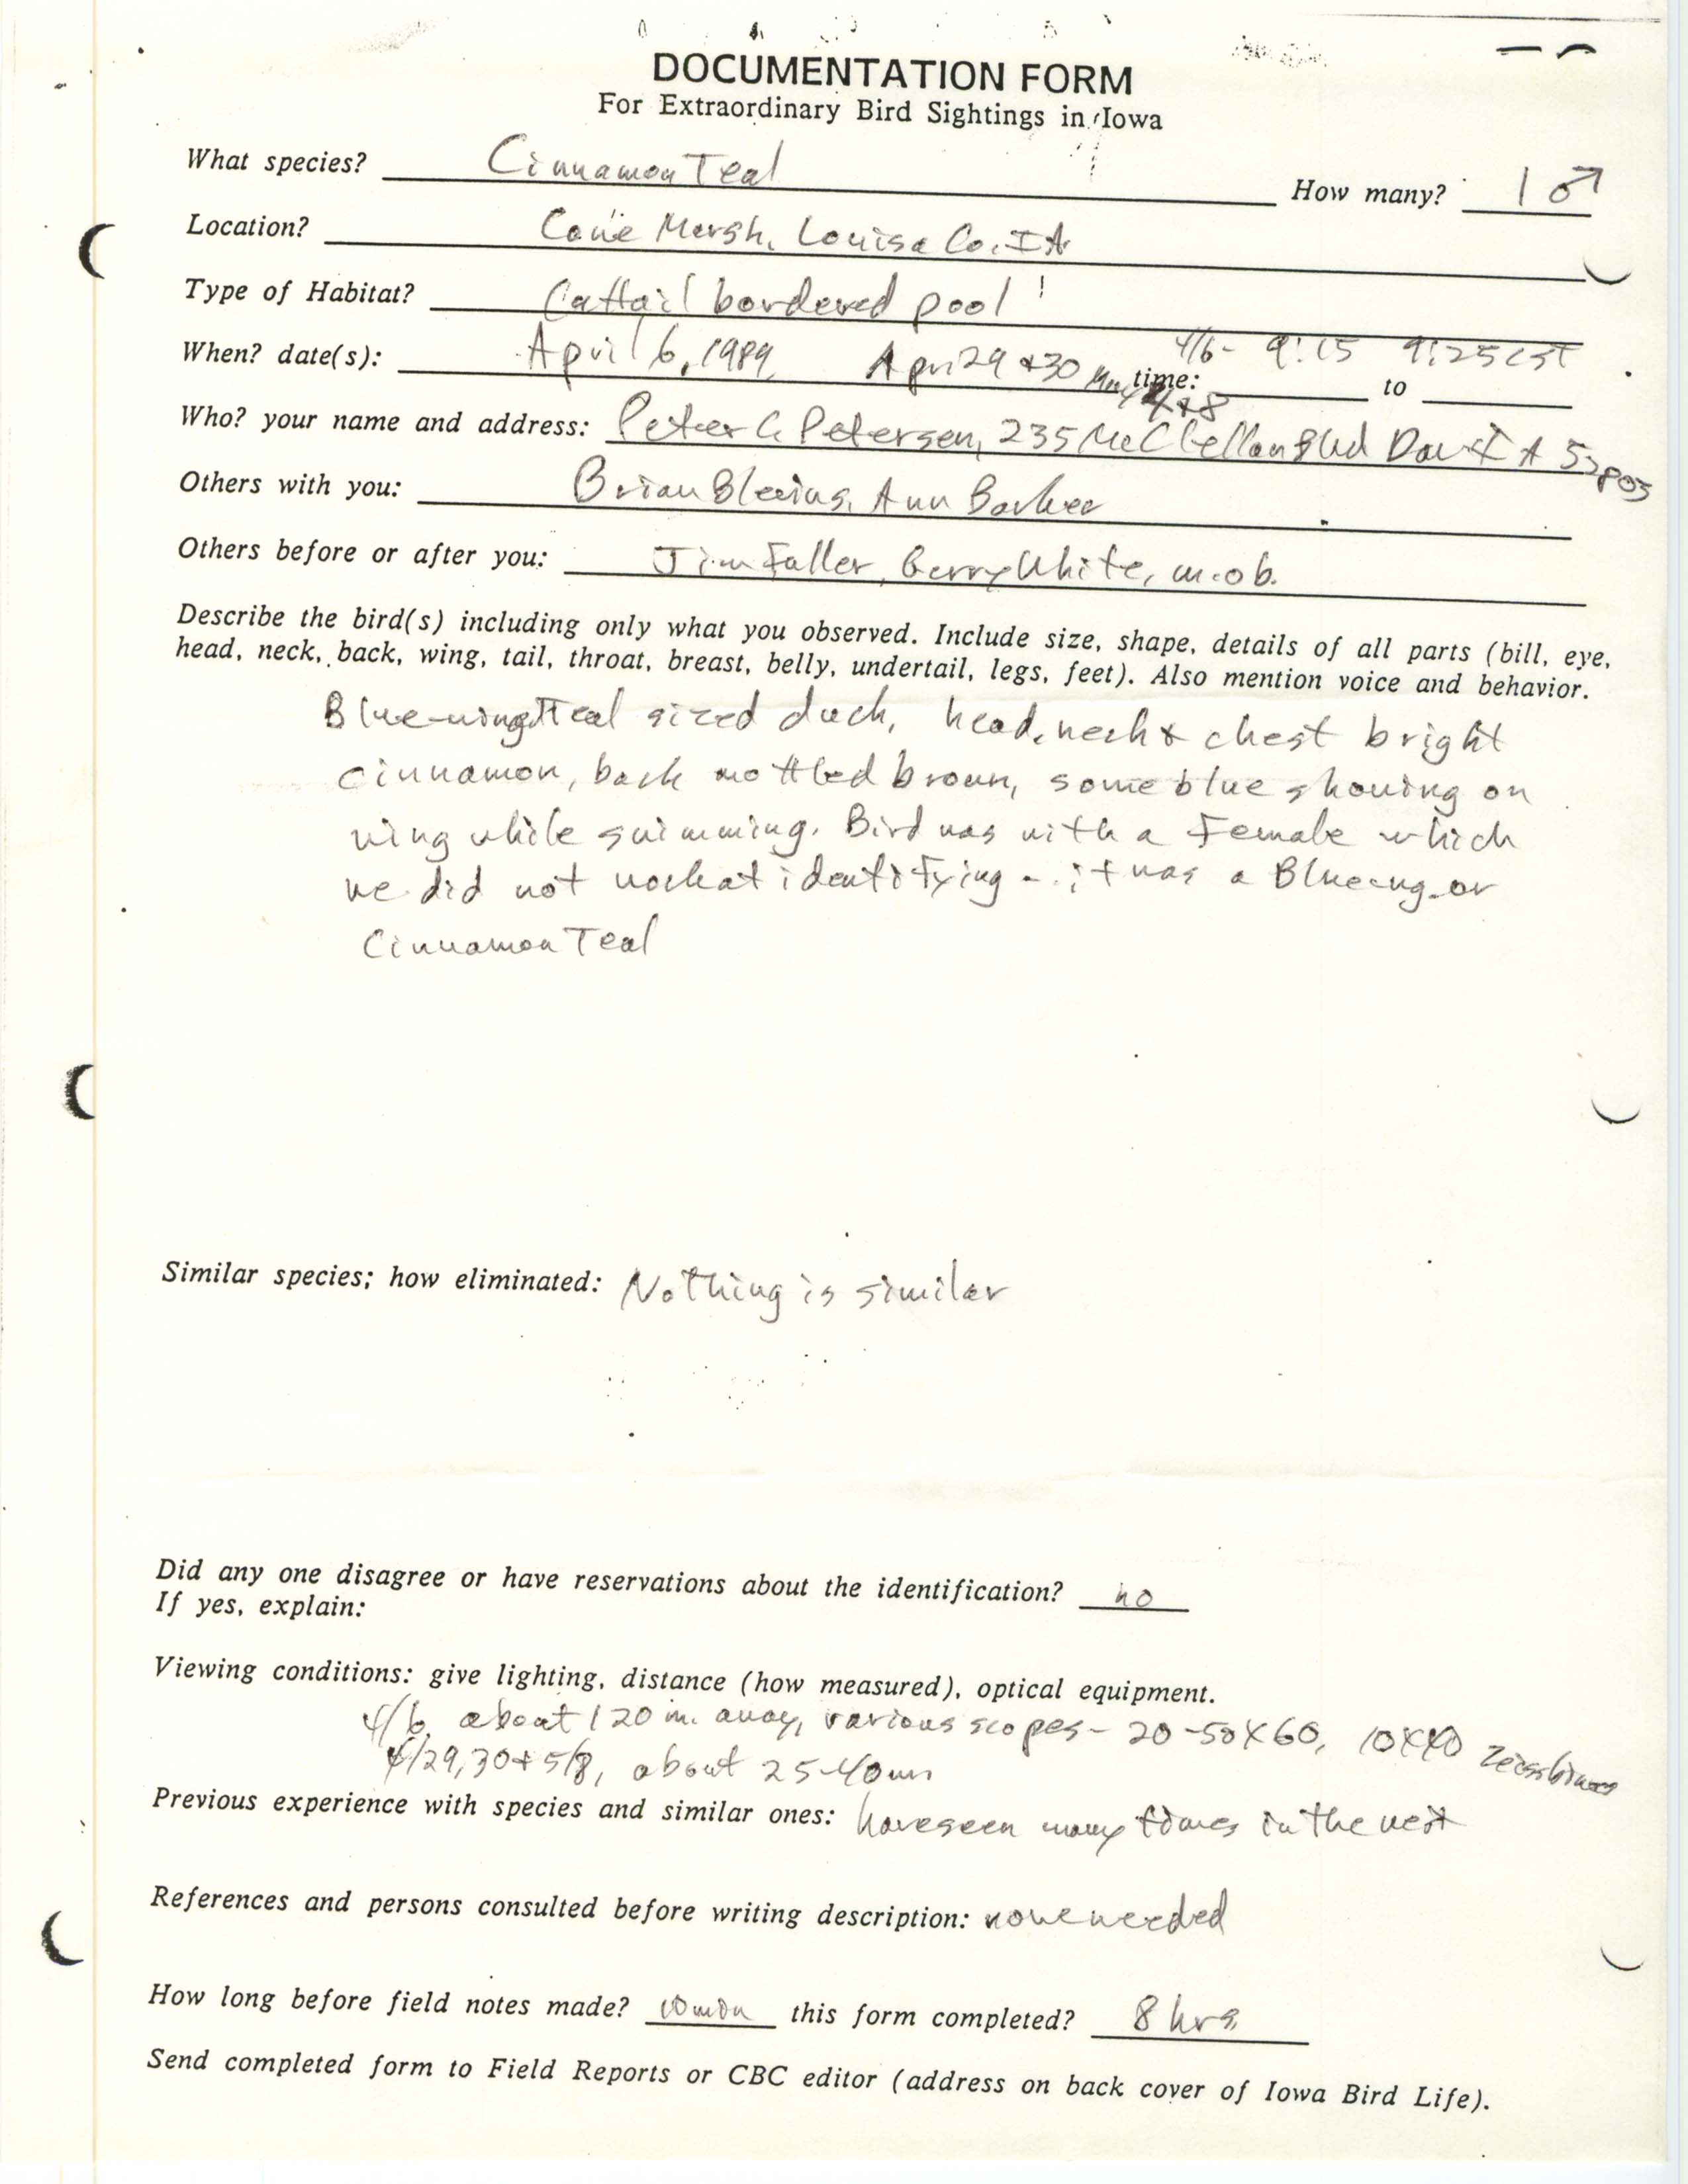 Rare bird documentation form for Cinnamon Teal at Cone Marsh in 1989